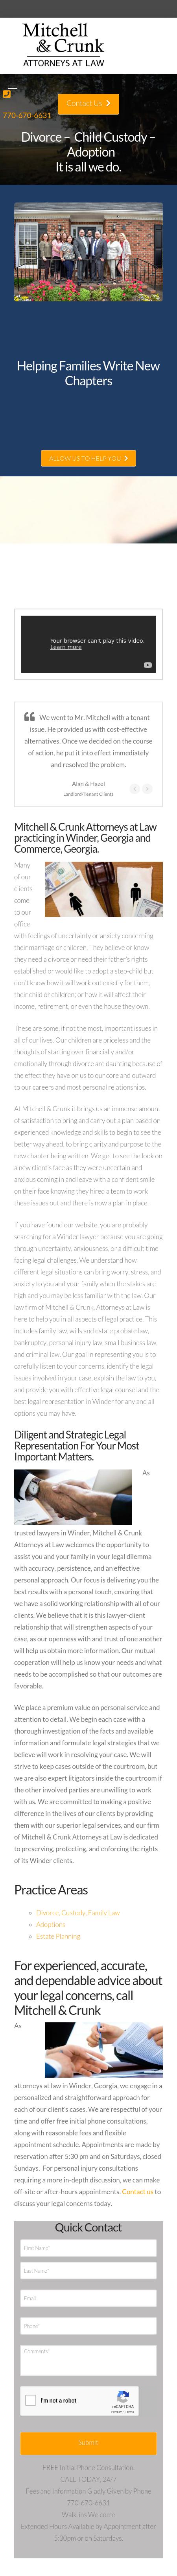 The Law Office of Douglas Mitchell - Winder GA Lawyers